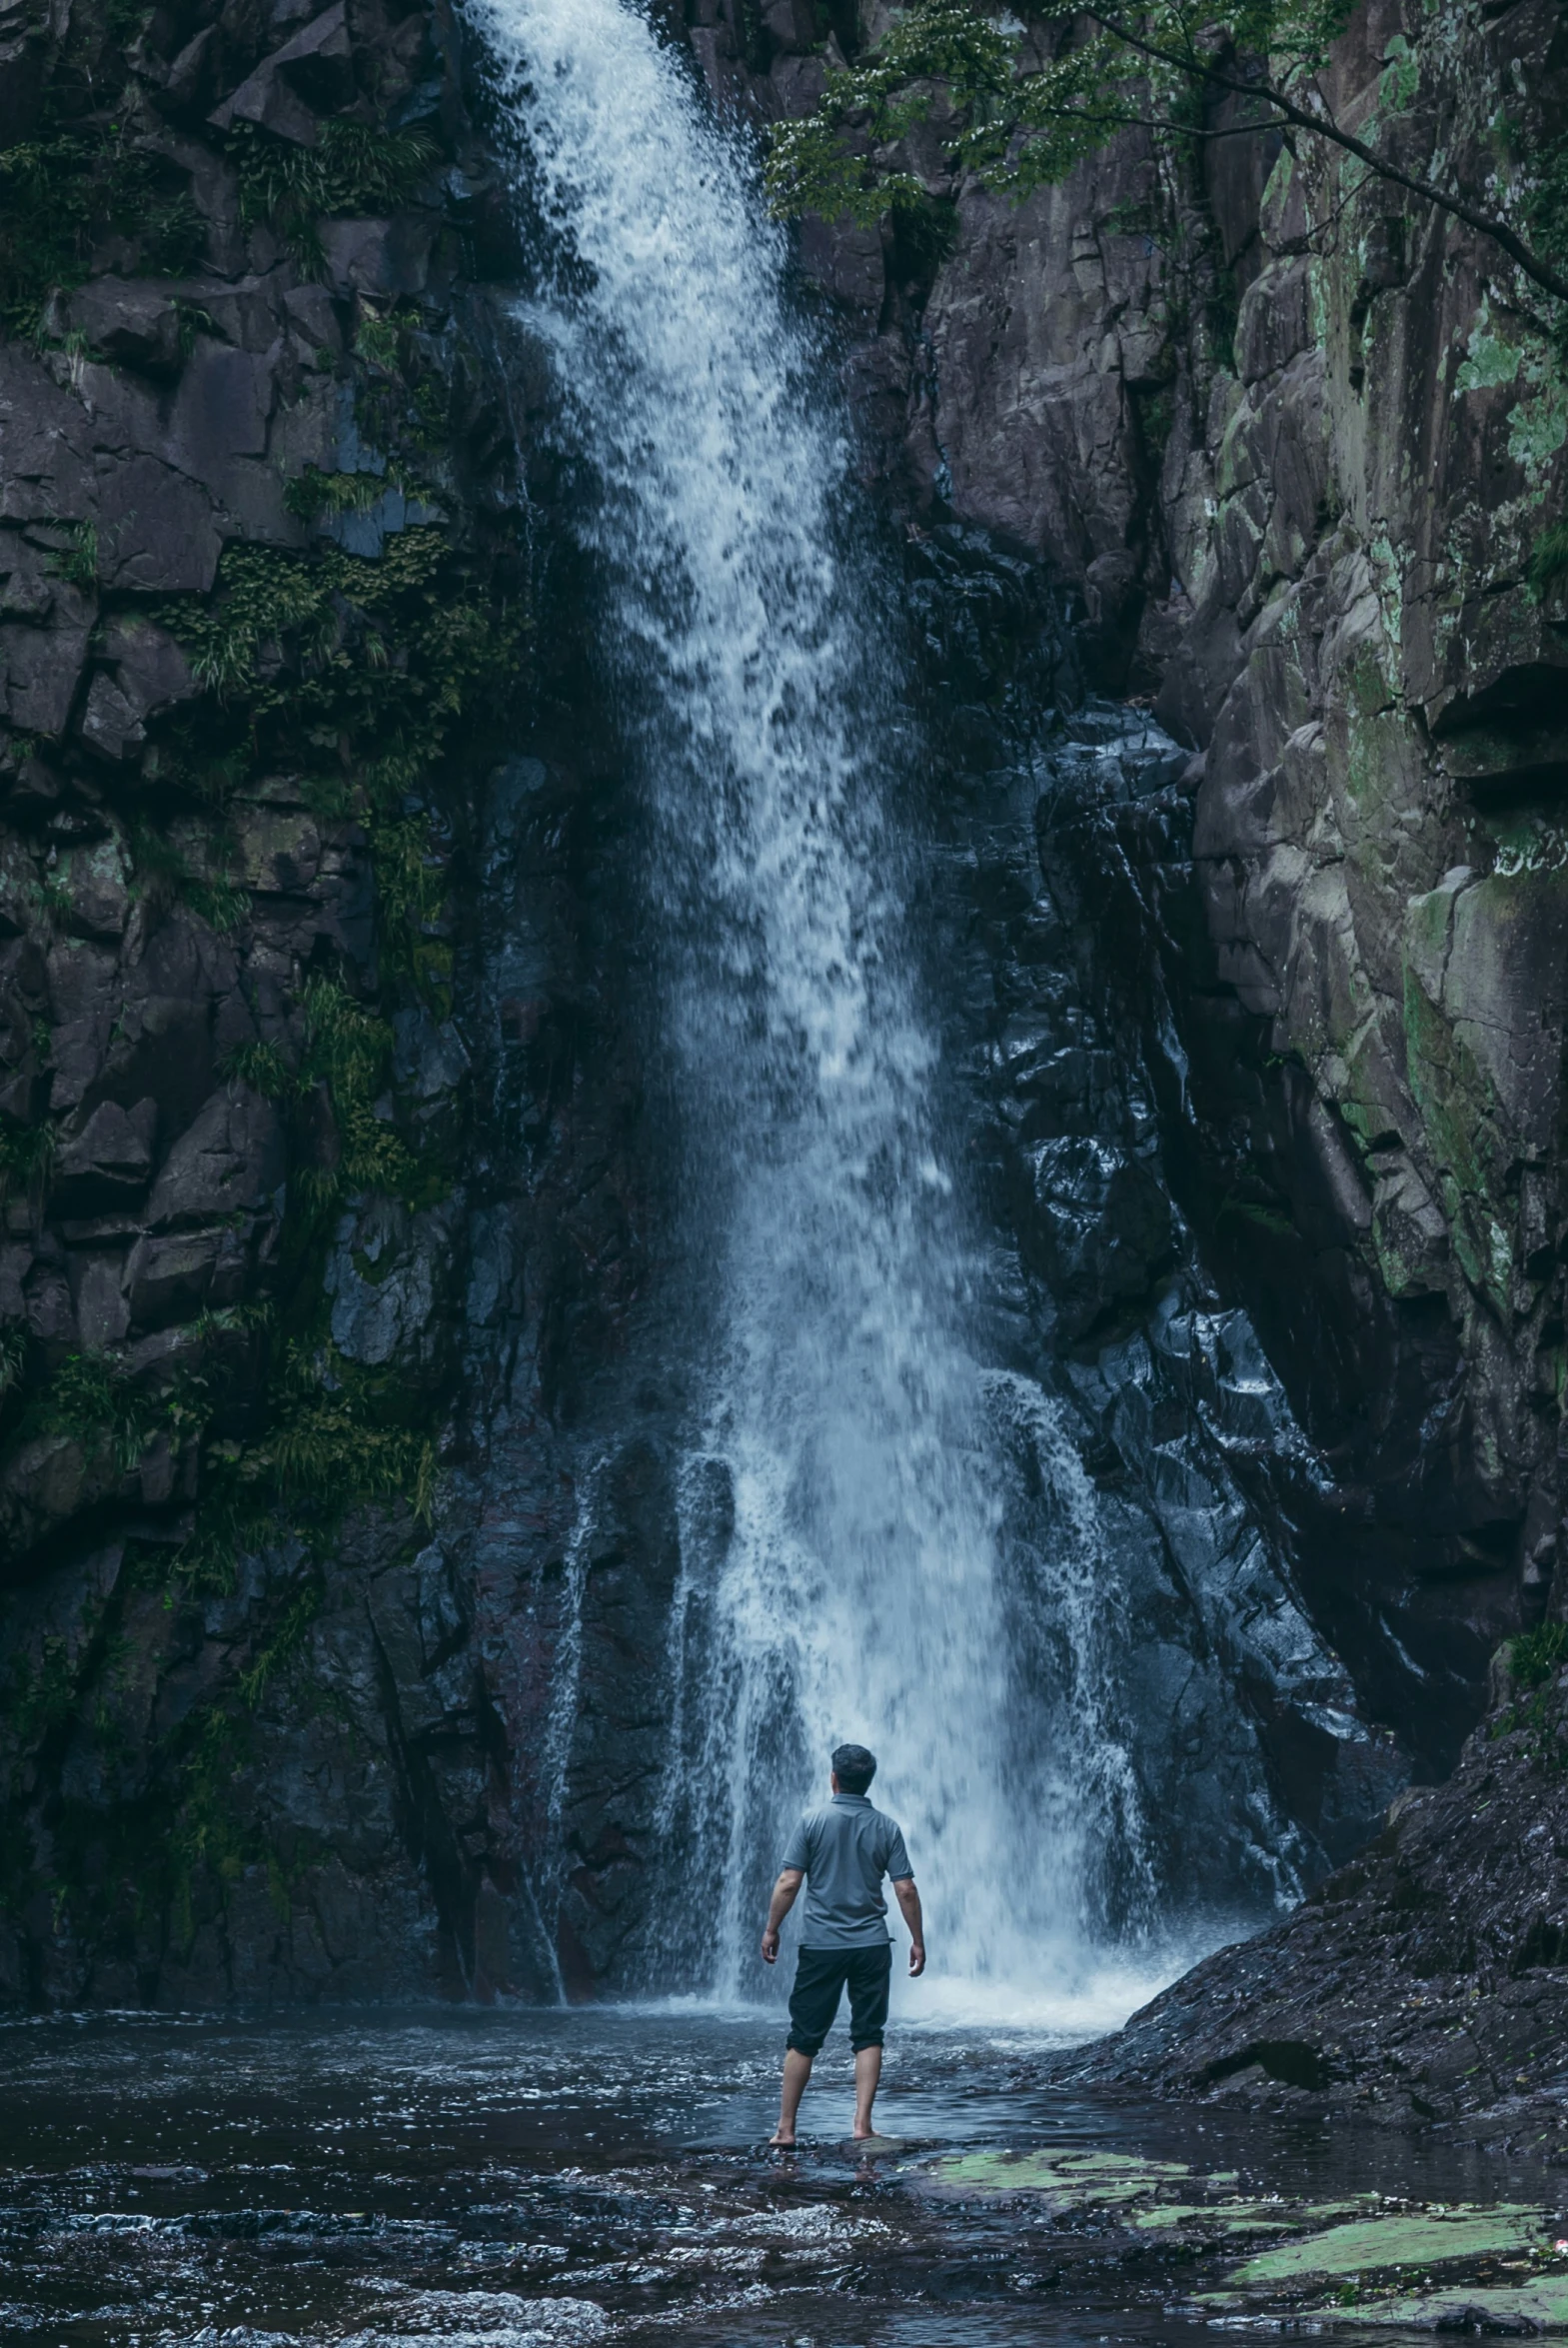 the man is standing in the water near the waterfall